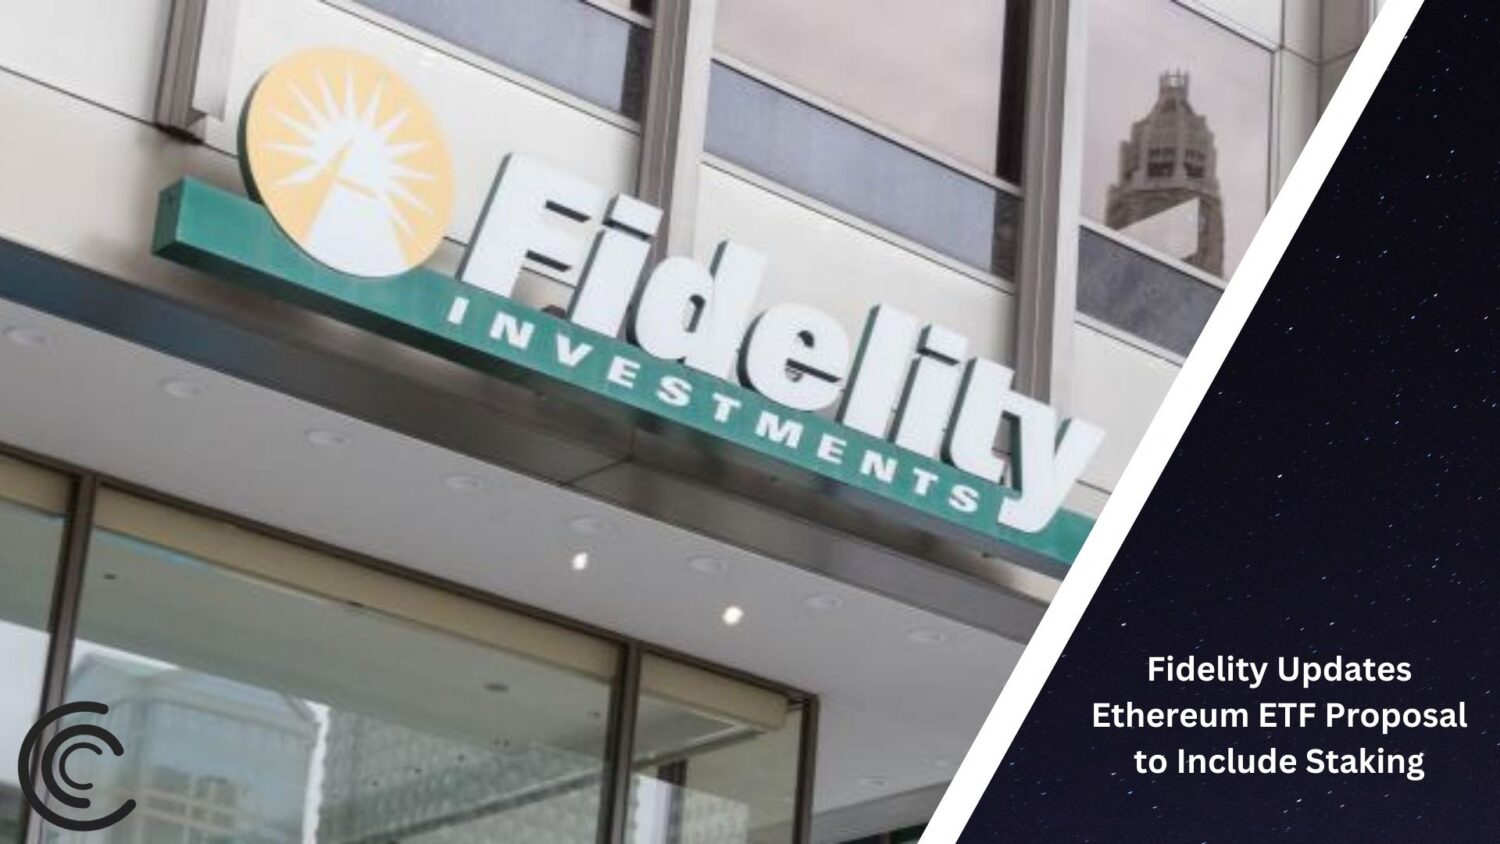 Fidelity Updates Ethereum Etf Proposal To Include Staking